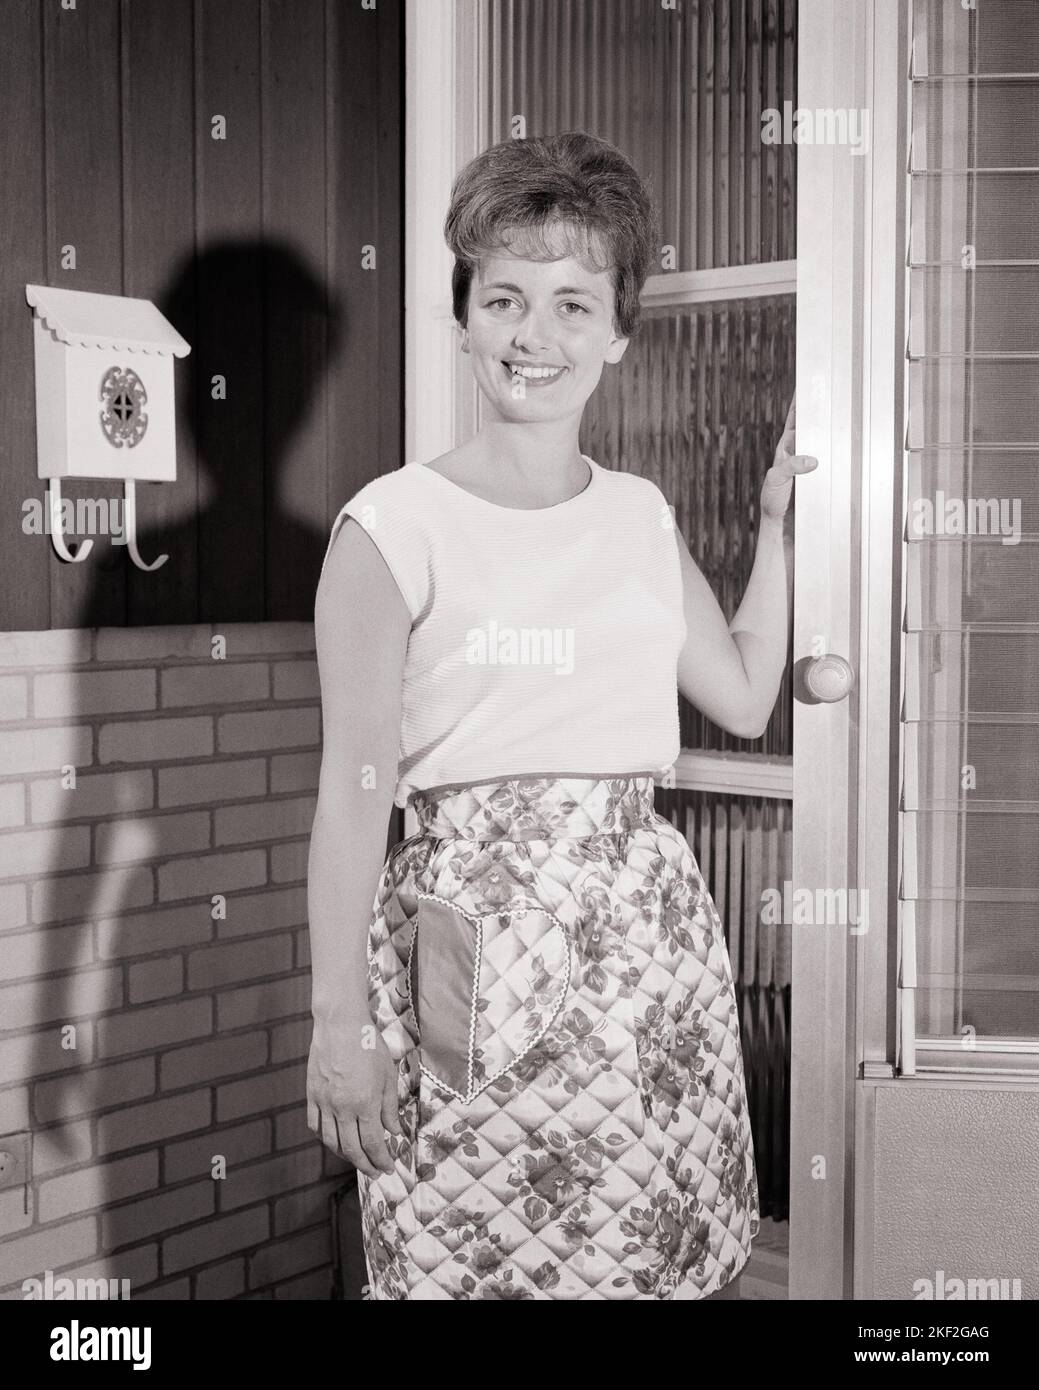 1960s SMILING HOUSEWIFE WEARING APRON STANDING WITH FRONT DOOR AJAR LOOKING AT CAMERA - s14156 HAR001 HARS FRIENDSHIP HALF-LENGTH LADIES PERSONS RESIDENTIAL BUILDINGS ANSWERING B&W EYE CONTACT HOMEMAKER HAPPINESS HOMEMAKERS CHEERFUL DISCOVERY PRIDE HOMES HOUSEWIVES SMILES WELCOMING AJAR JOYFUL RESIDENCE MID-ADULT MID-ADULT WOMAN BLACK AND WHITE CAUCASIAN ETHNICITY HAR001 OLD FASHIONED Stock Photo